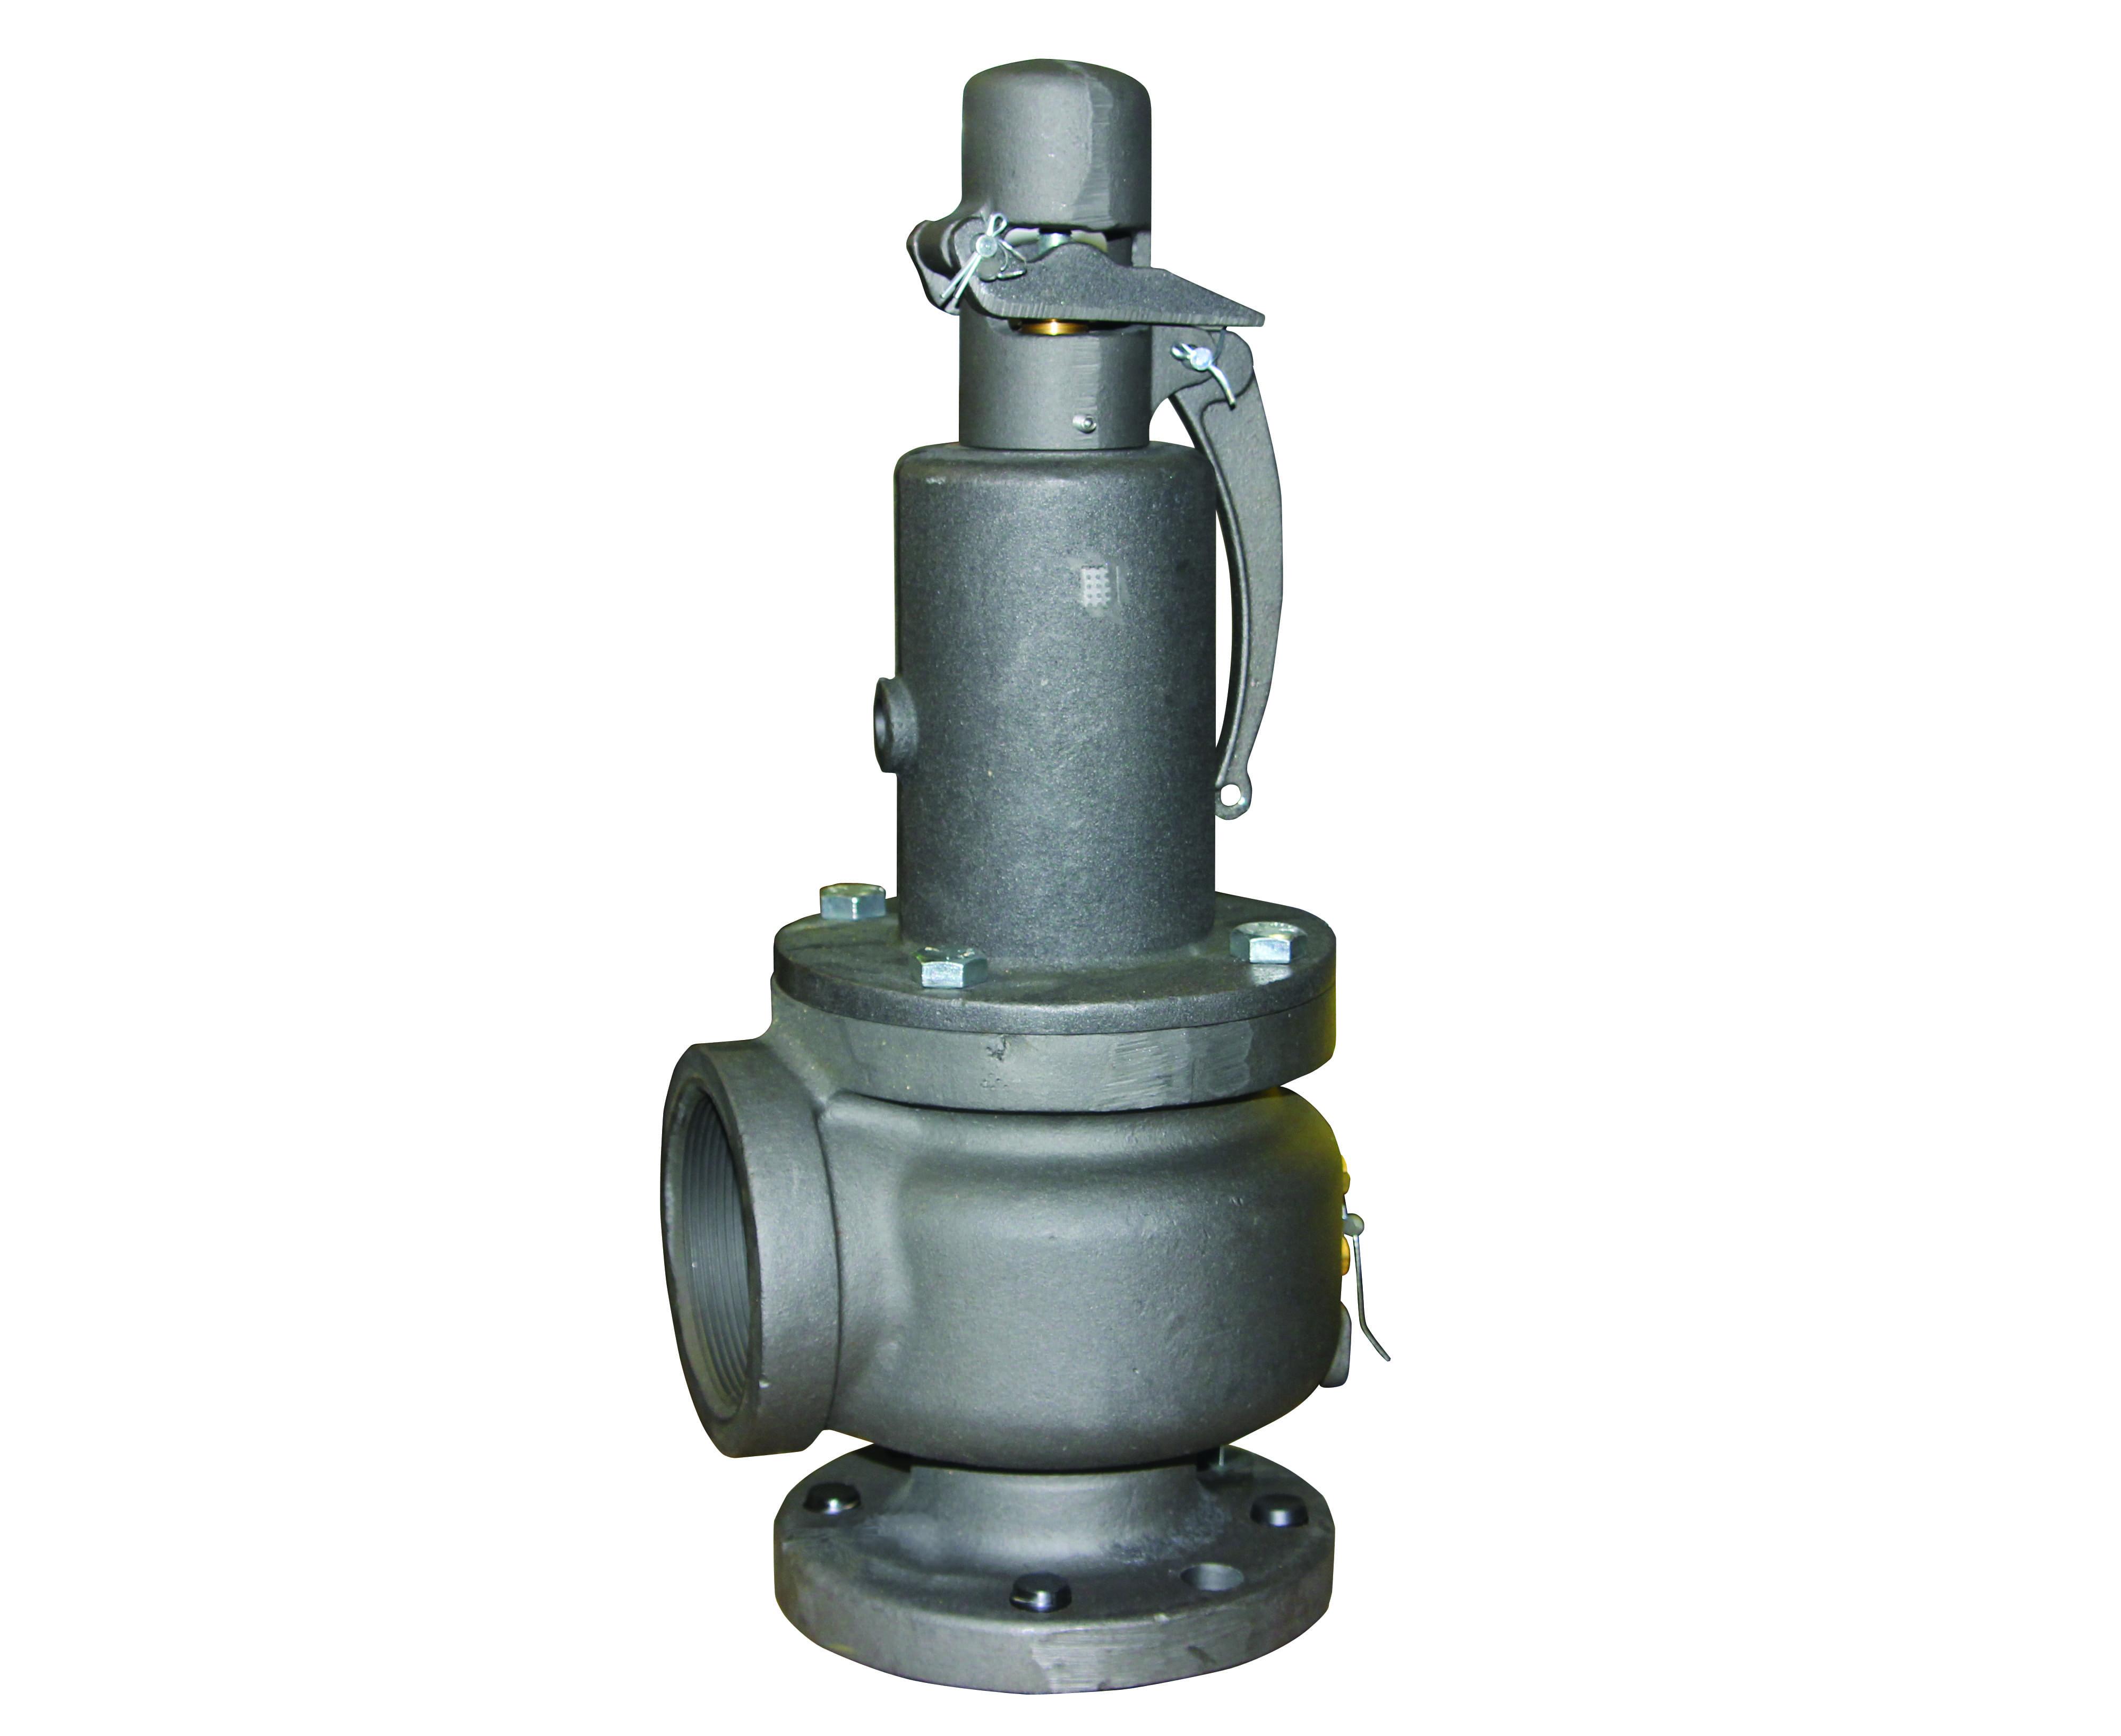 Preview image for Apollo ASME Section VIII Steam Cast Iron Safety Relief Valve, 2-1/2" X 4" (2 x FNPT)